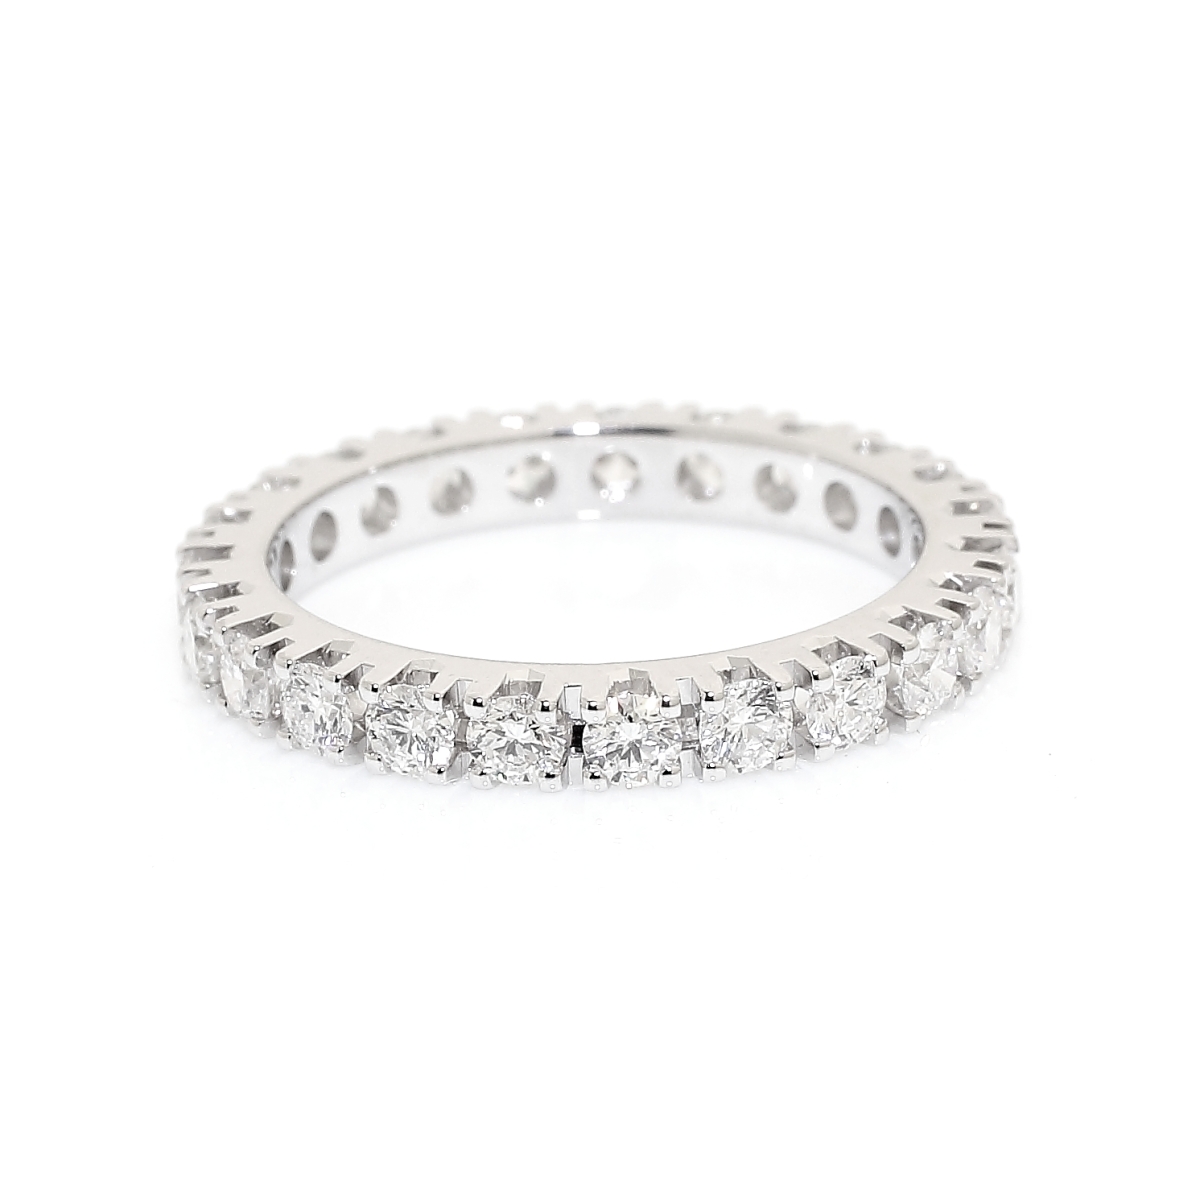 750 Mill. White Gold Ring with 1,20 Ct. Diamonds